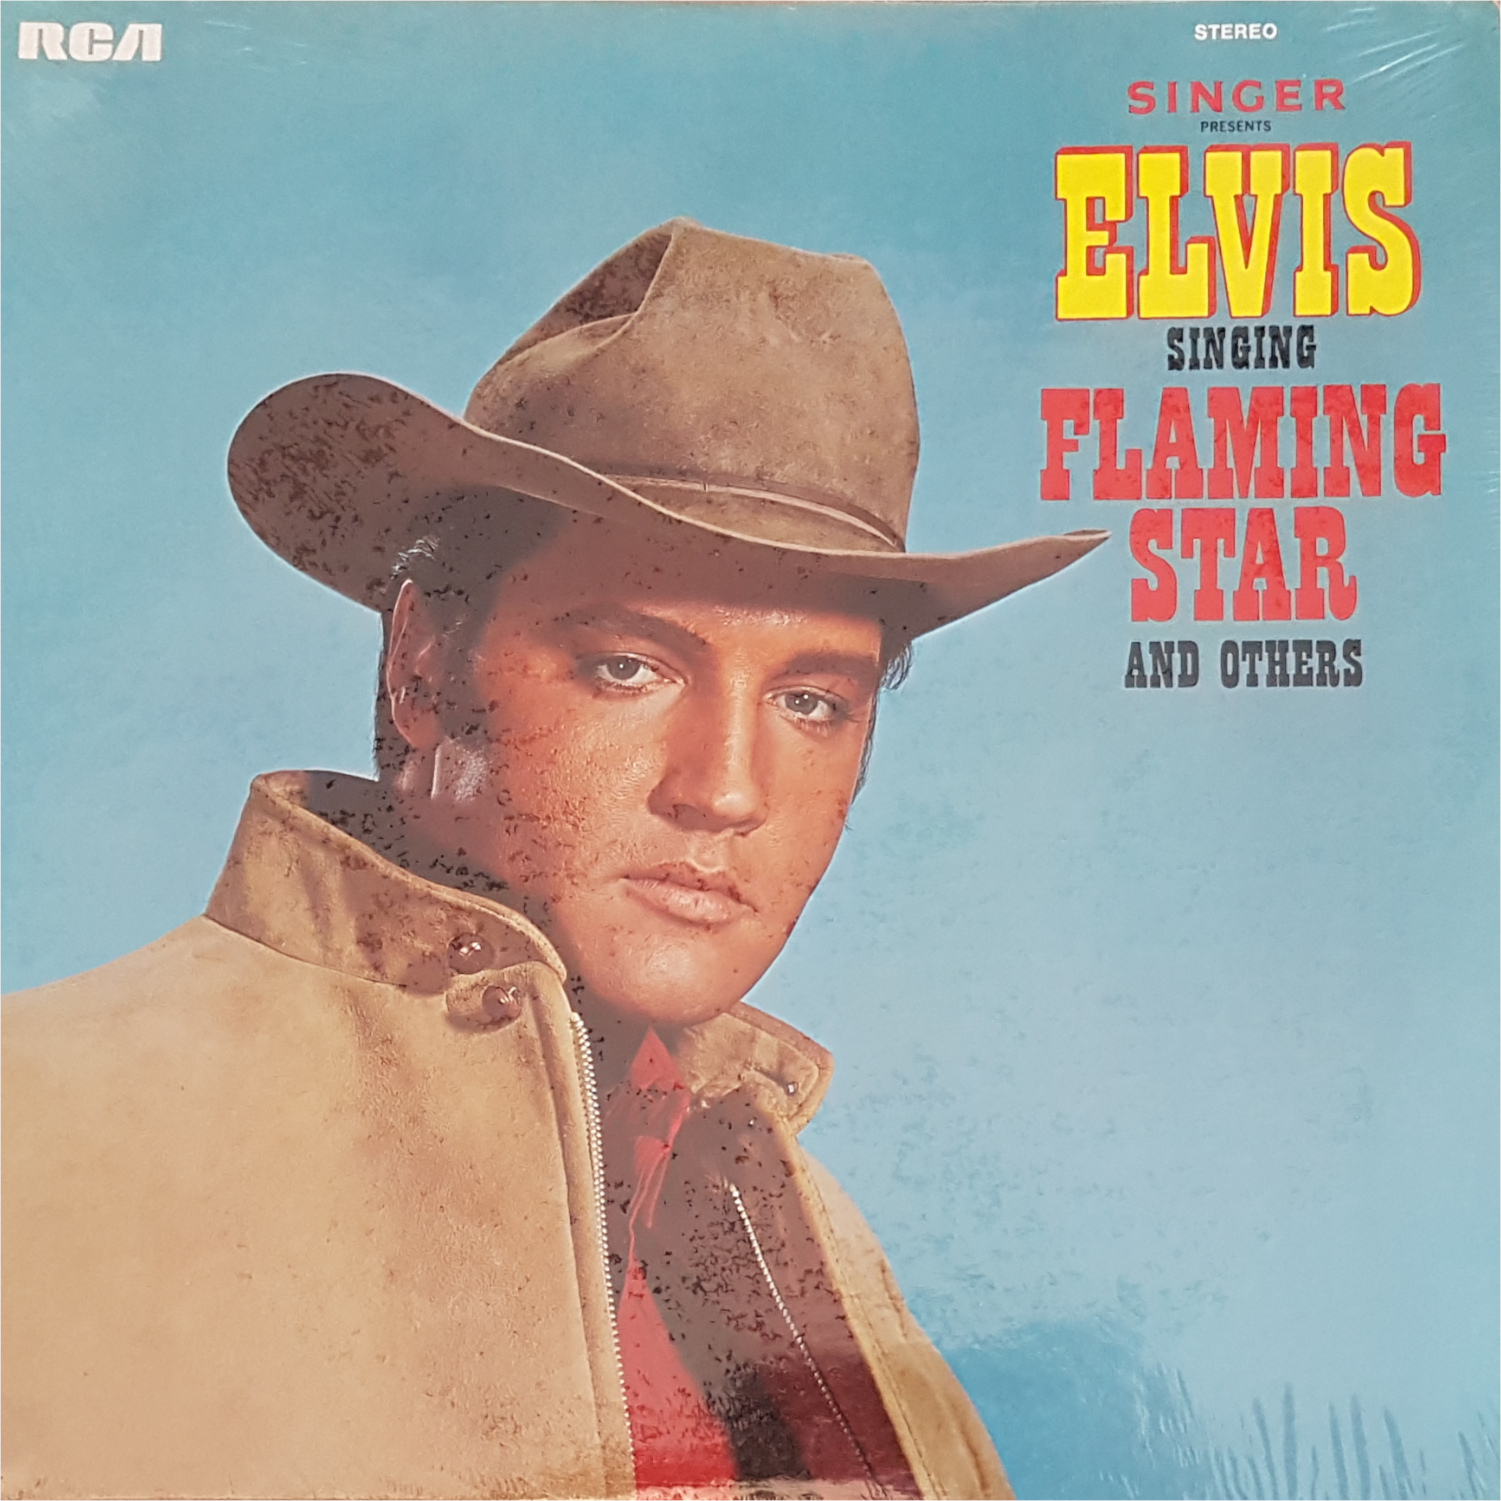 SINGER PRESENTS ELVIS SINGS FLAMING STAR AND OTHERS Prs-27917ujme